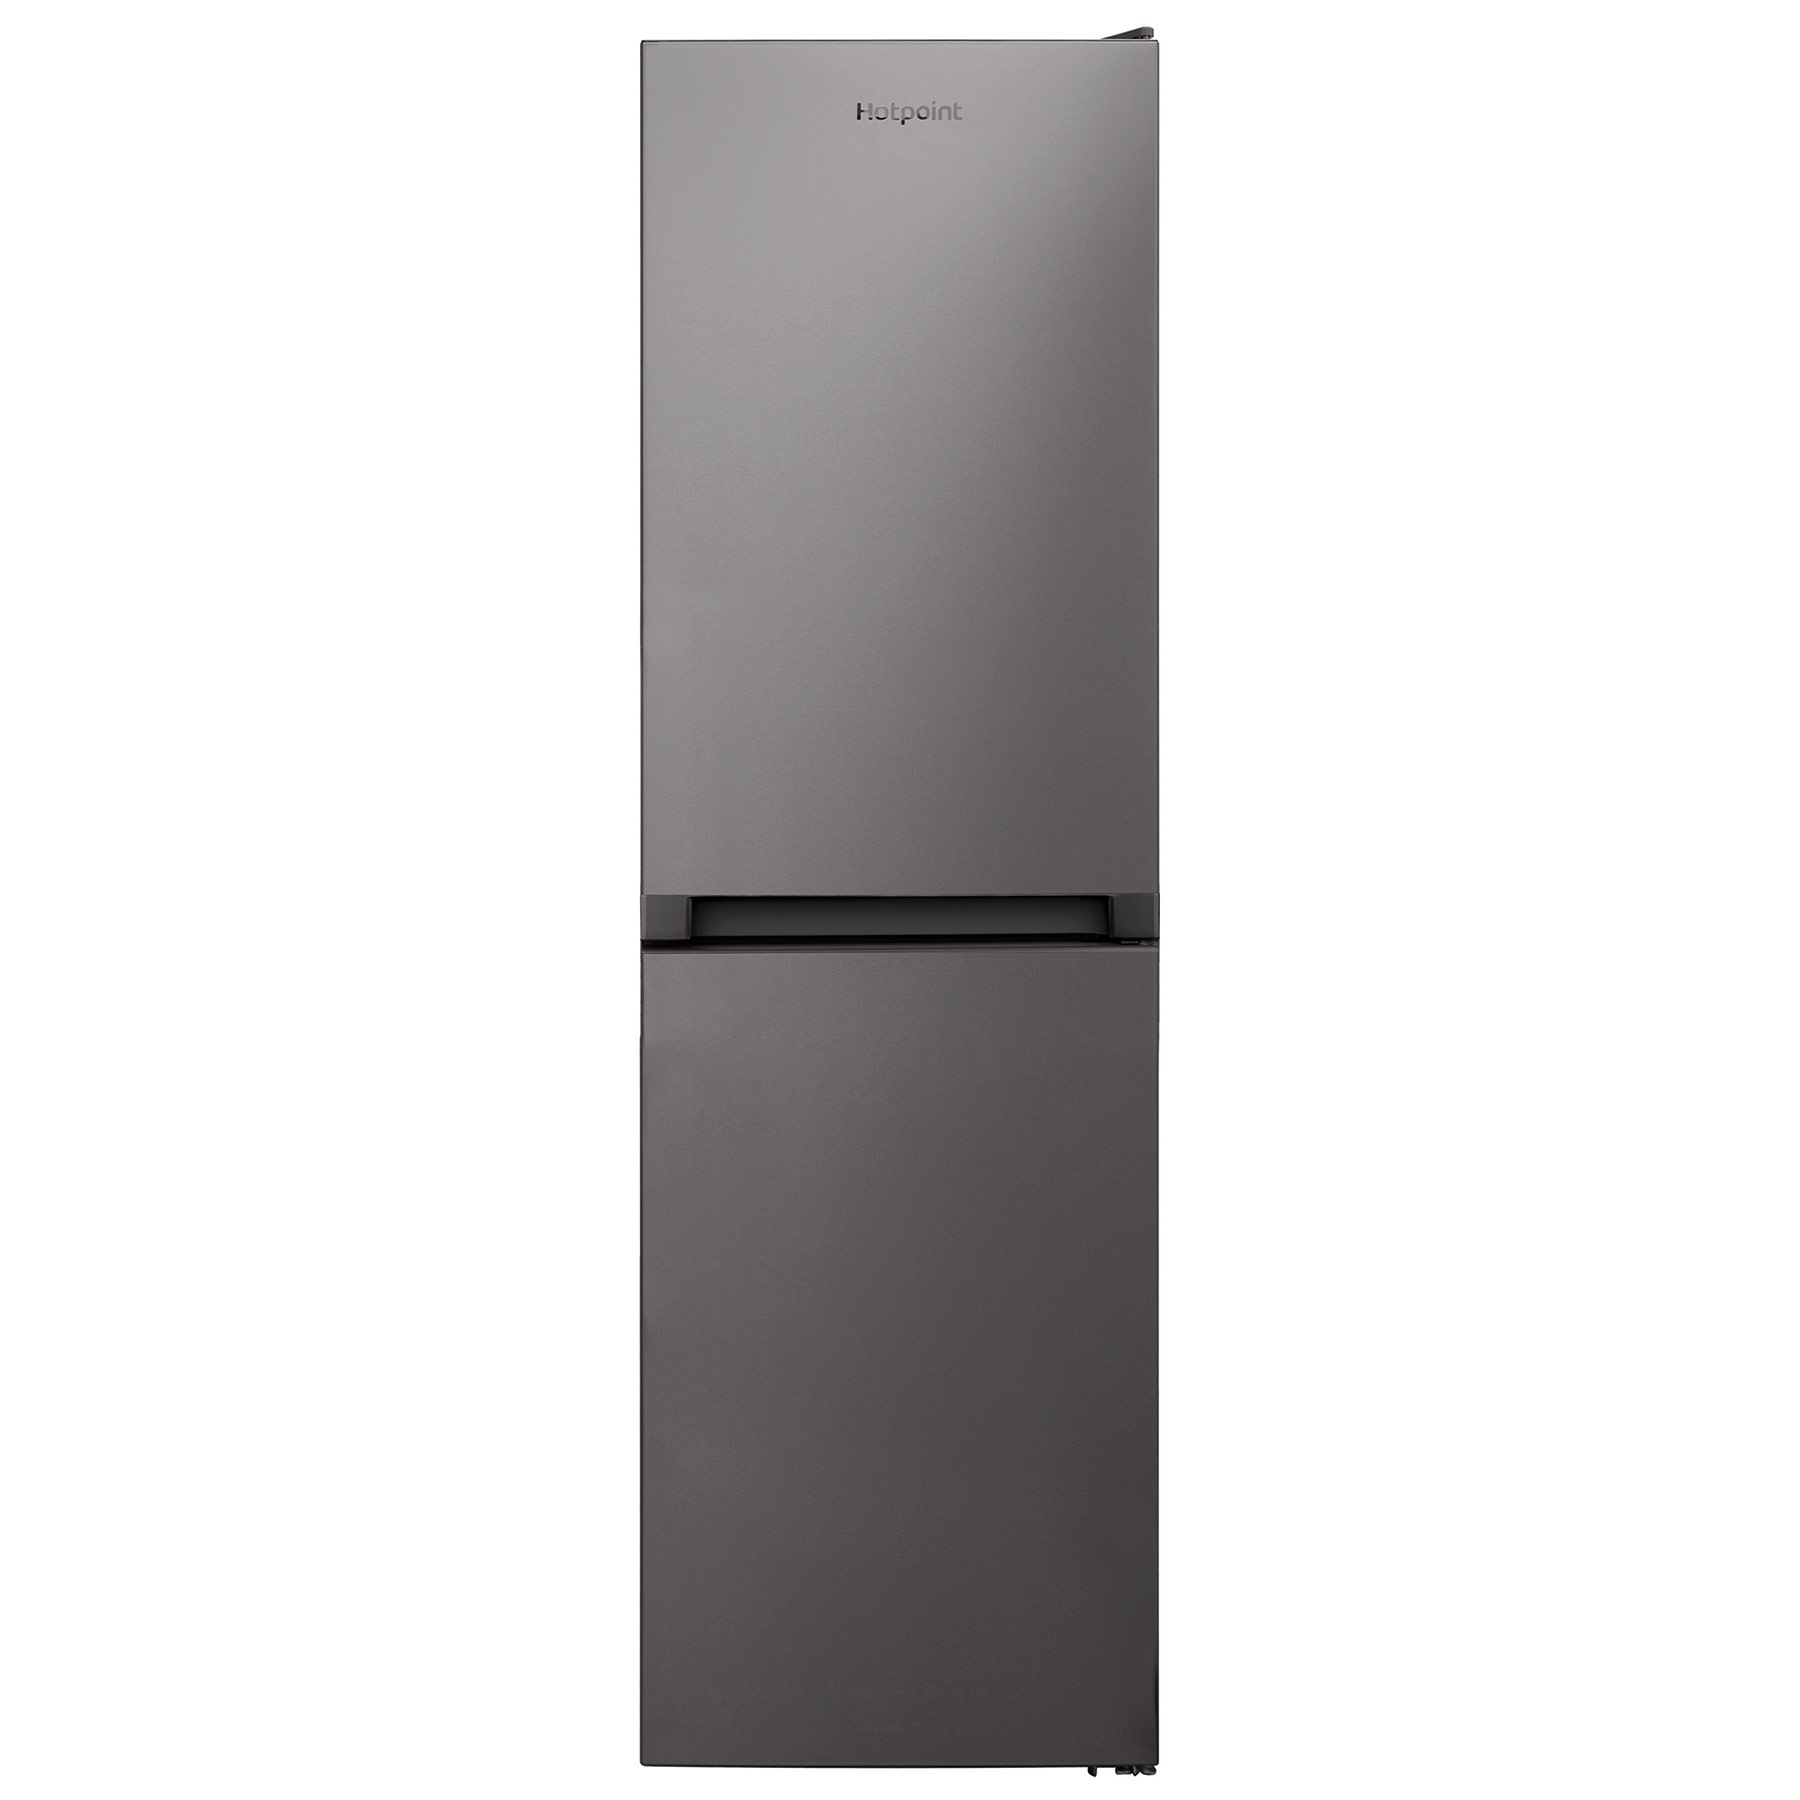 Image of Hotpoint HBNF55182SUK 54cm Frost Free Fridge Freezer in Silver 1 83m E